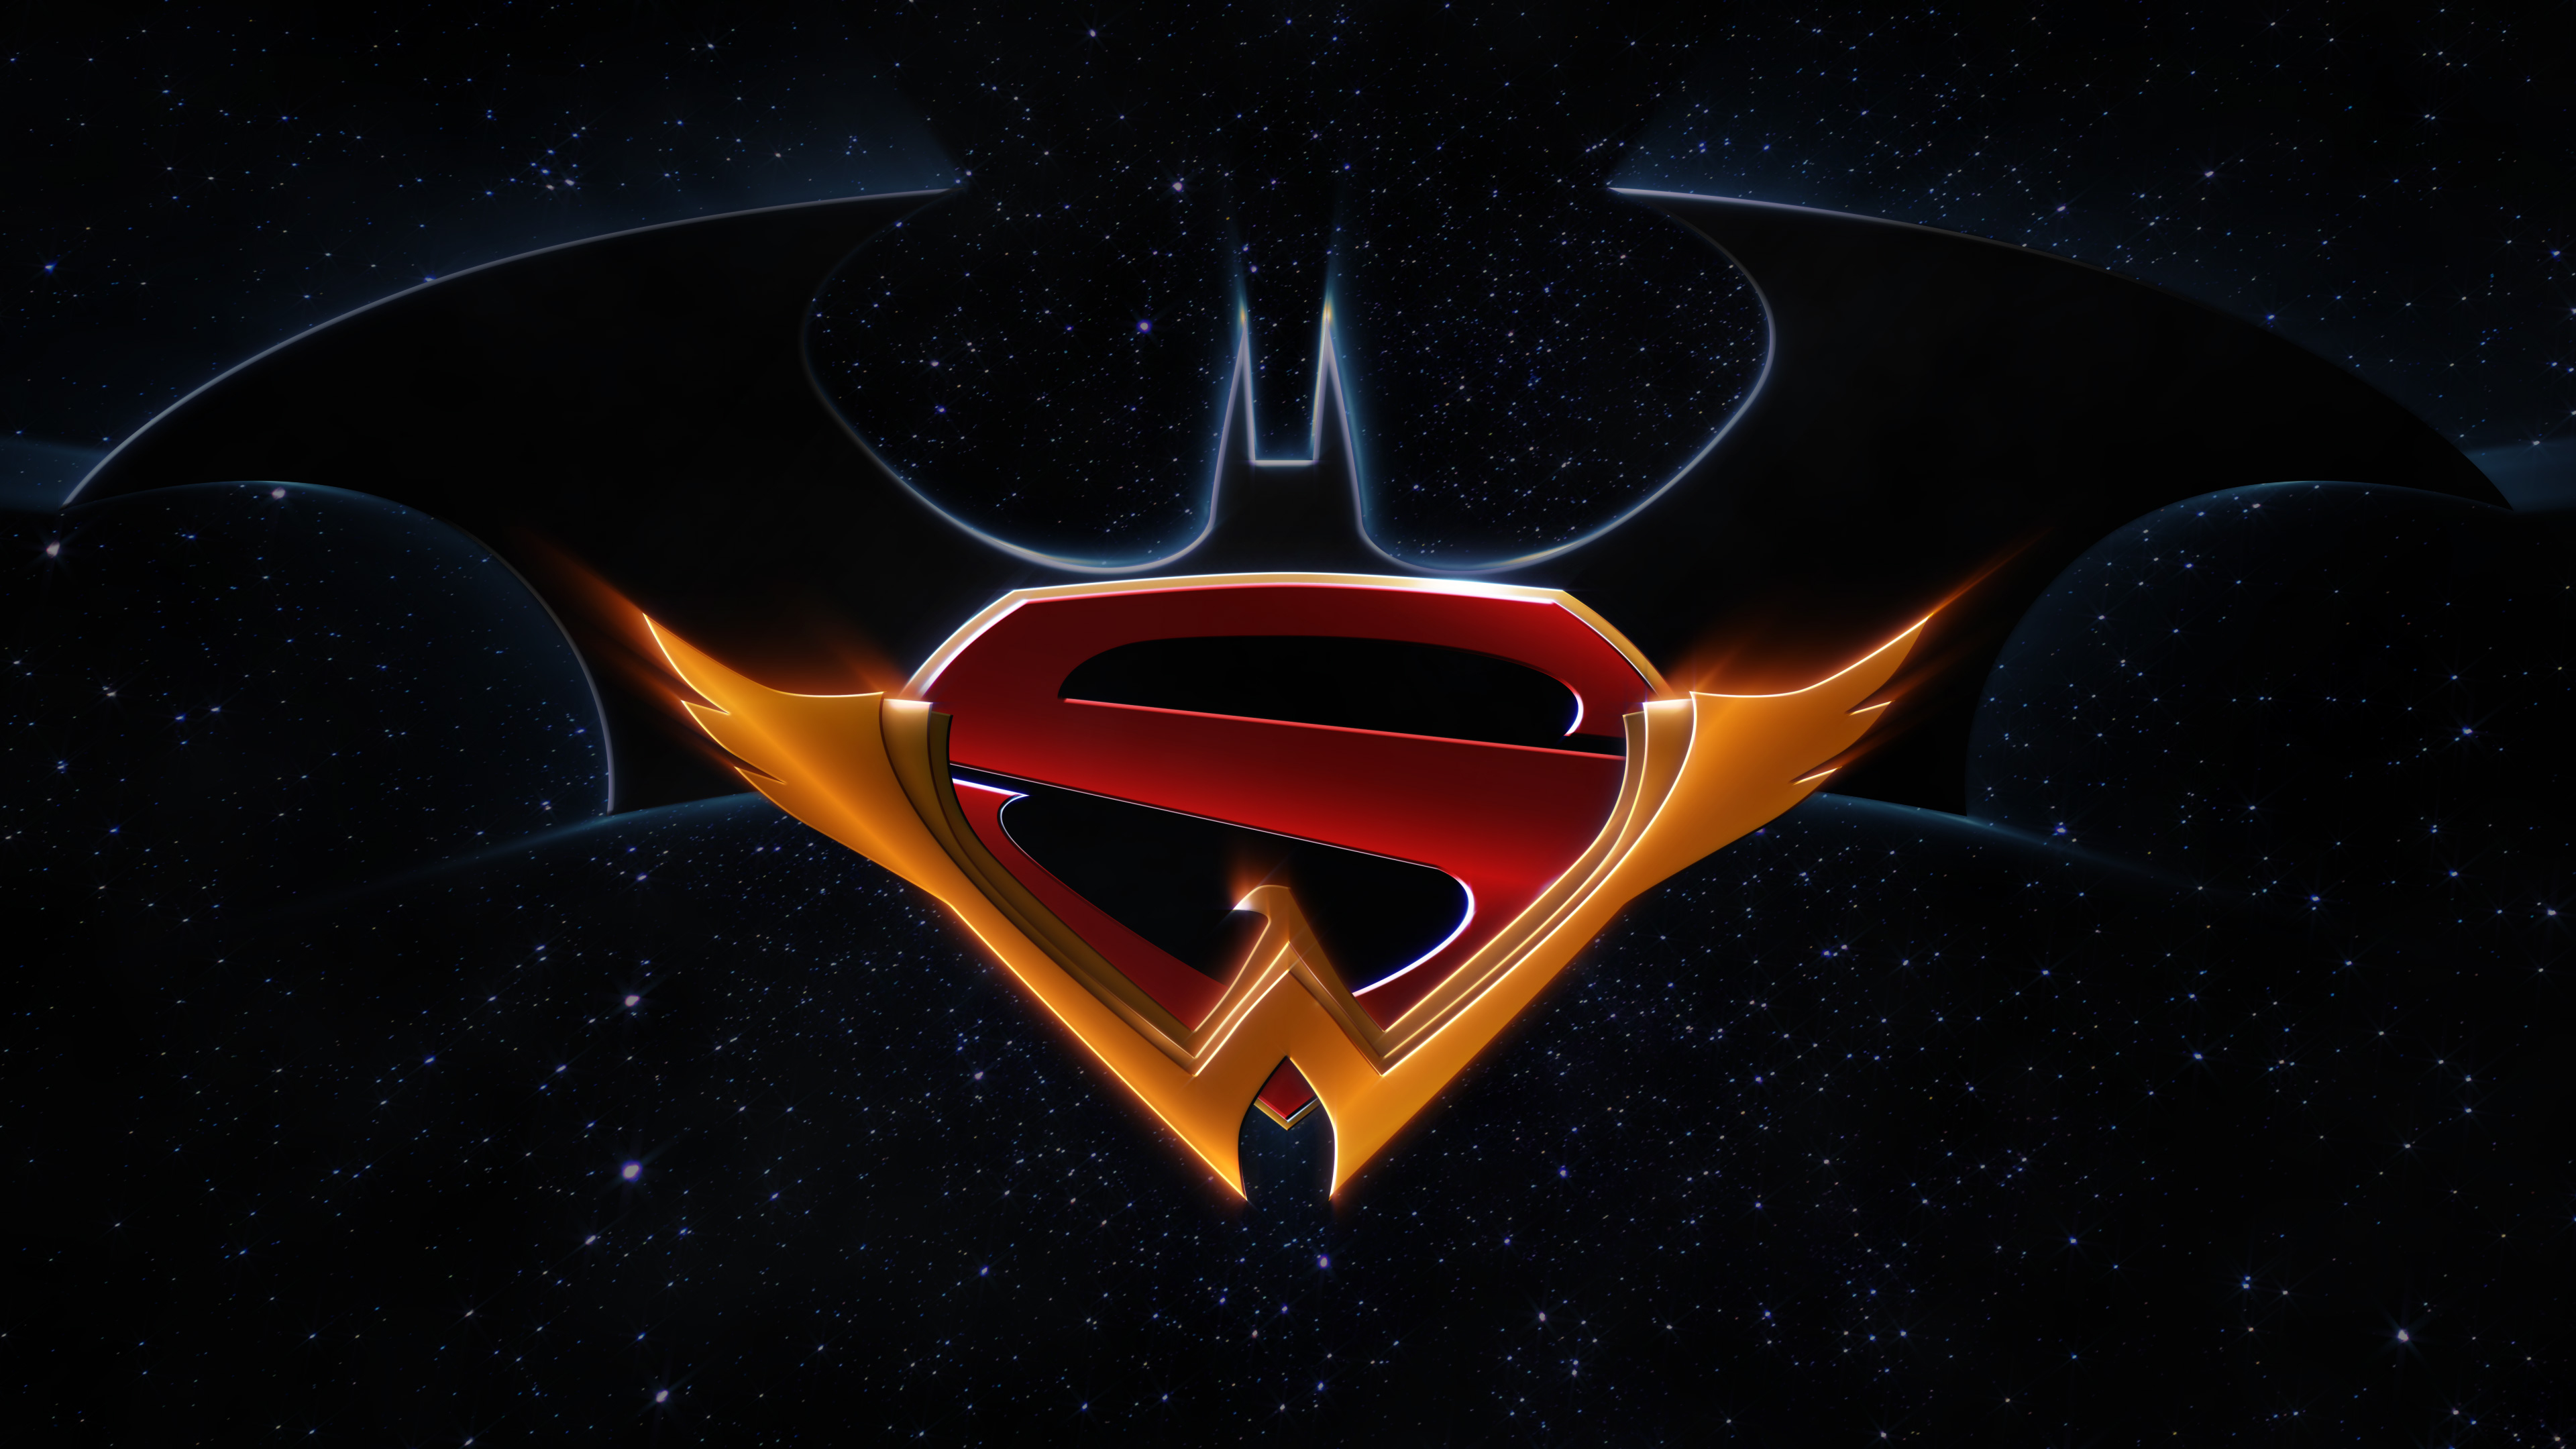 3840x2160 Batman Superman Wonder Woman Trinity Logo, HD Superheroes, 4k Wallpapers, Images, Backgrounds, Photos and Pictures